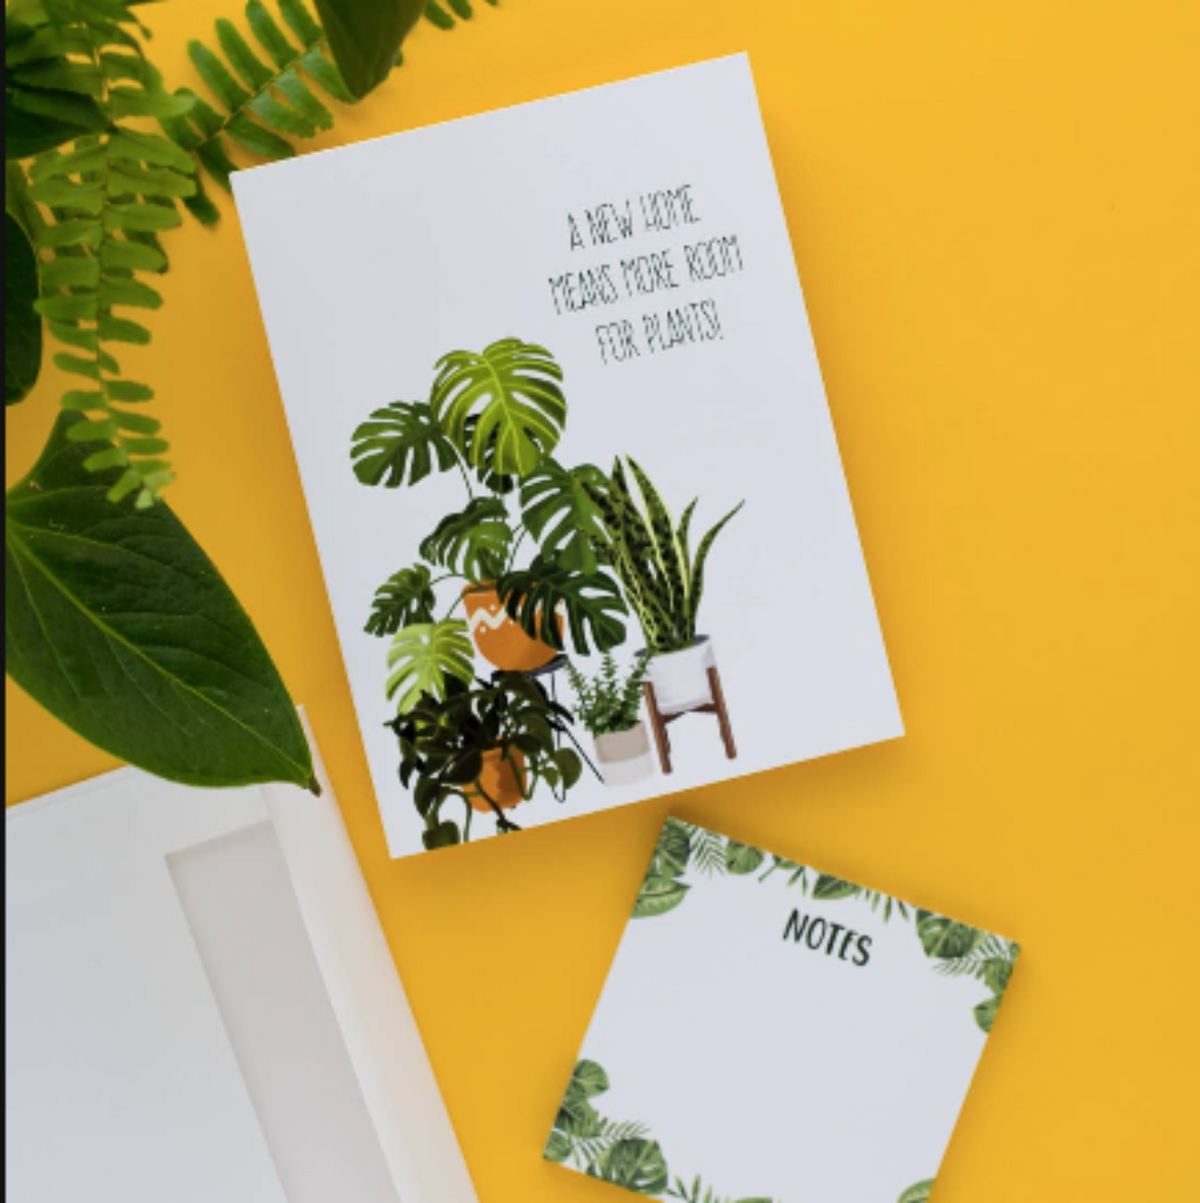 A New Home Means More Room For Plants! - Greeting Card